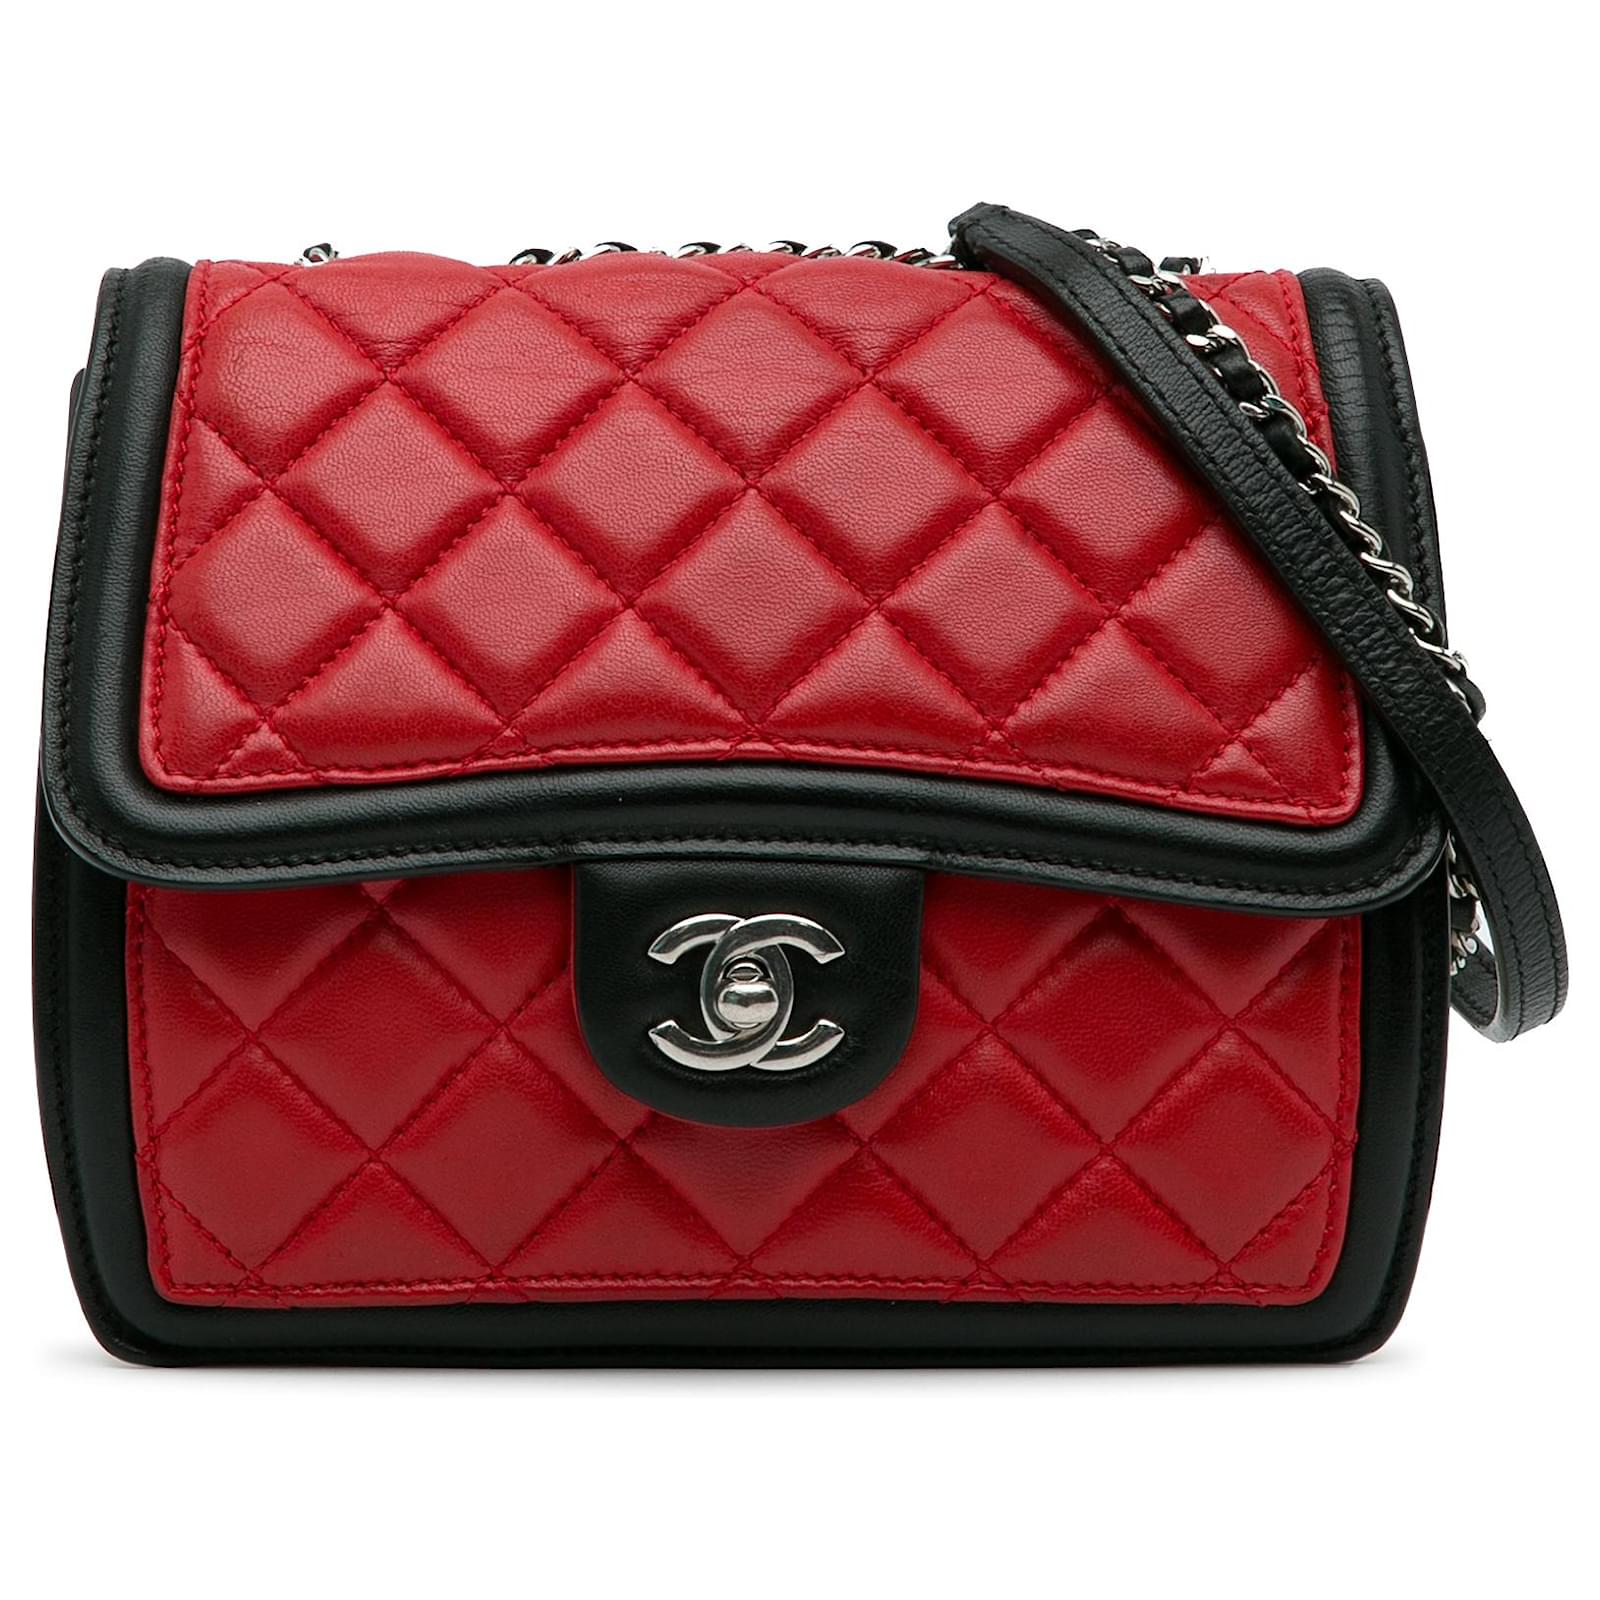 CHANEL Graphic Flap Bag Quilted Calfskin Medium